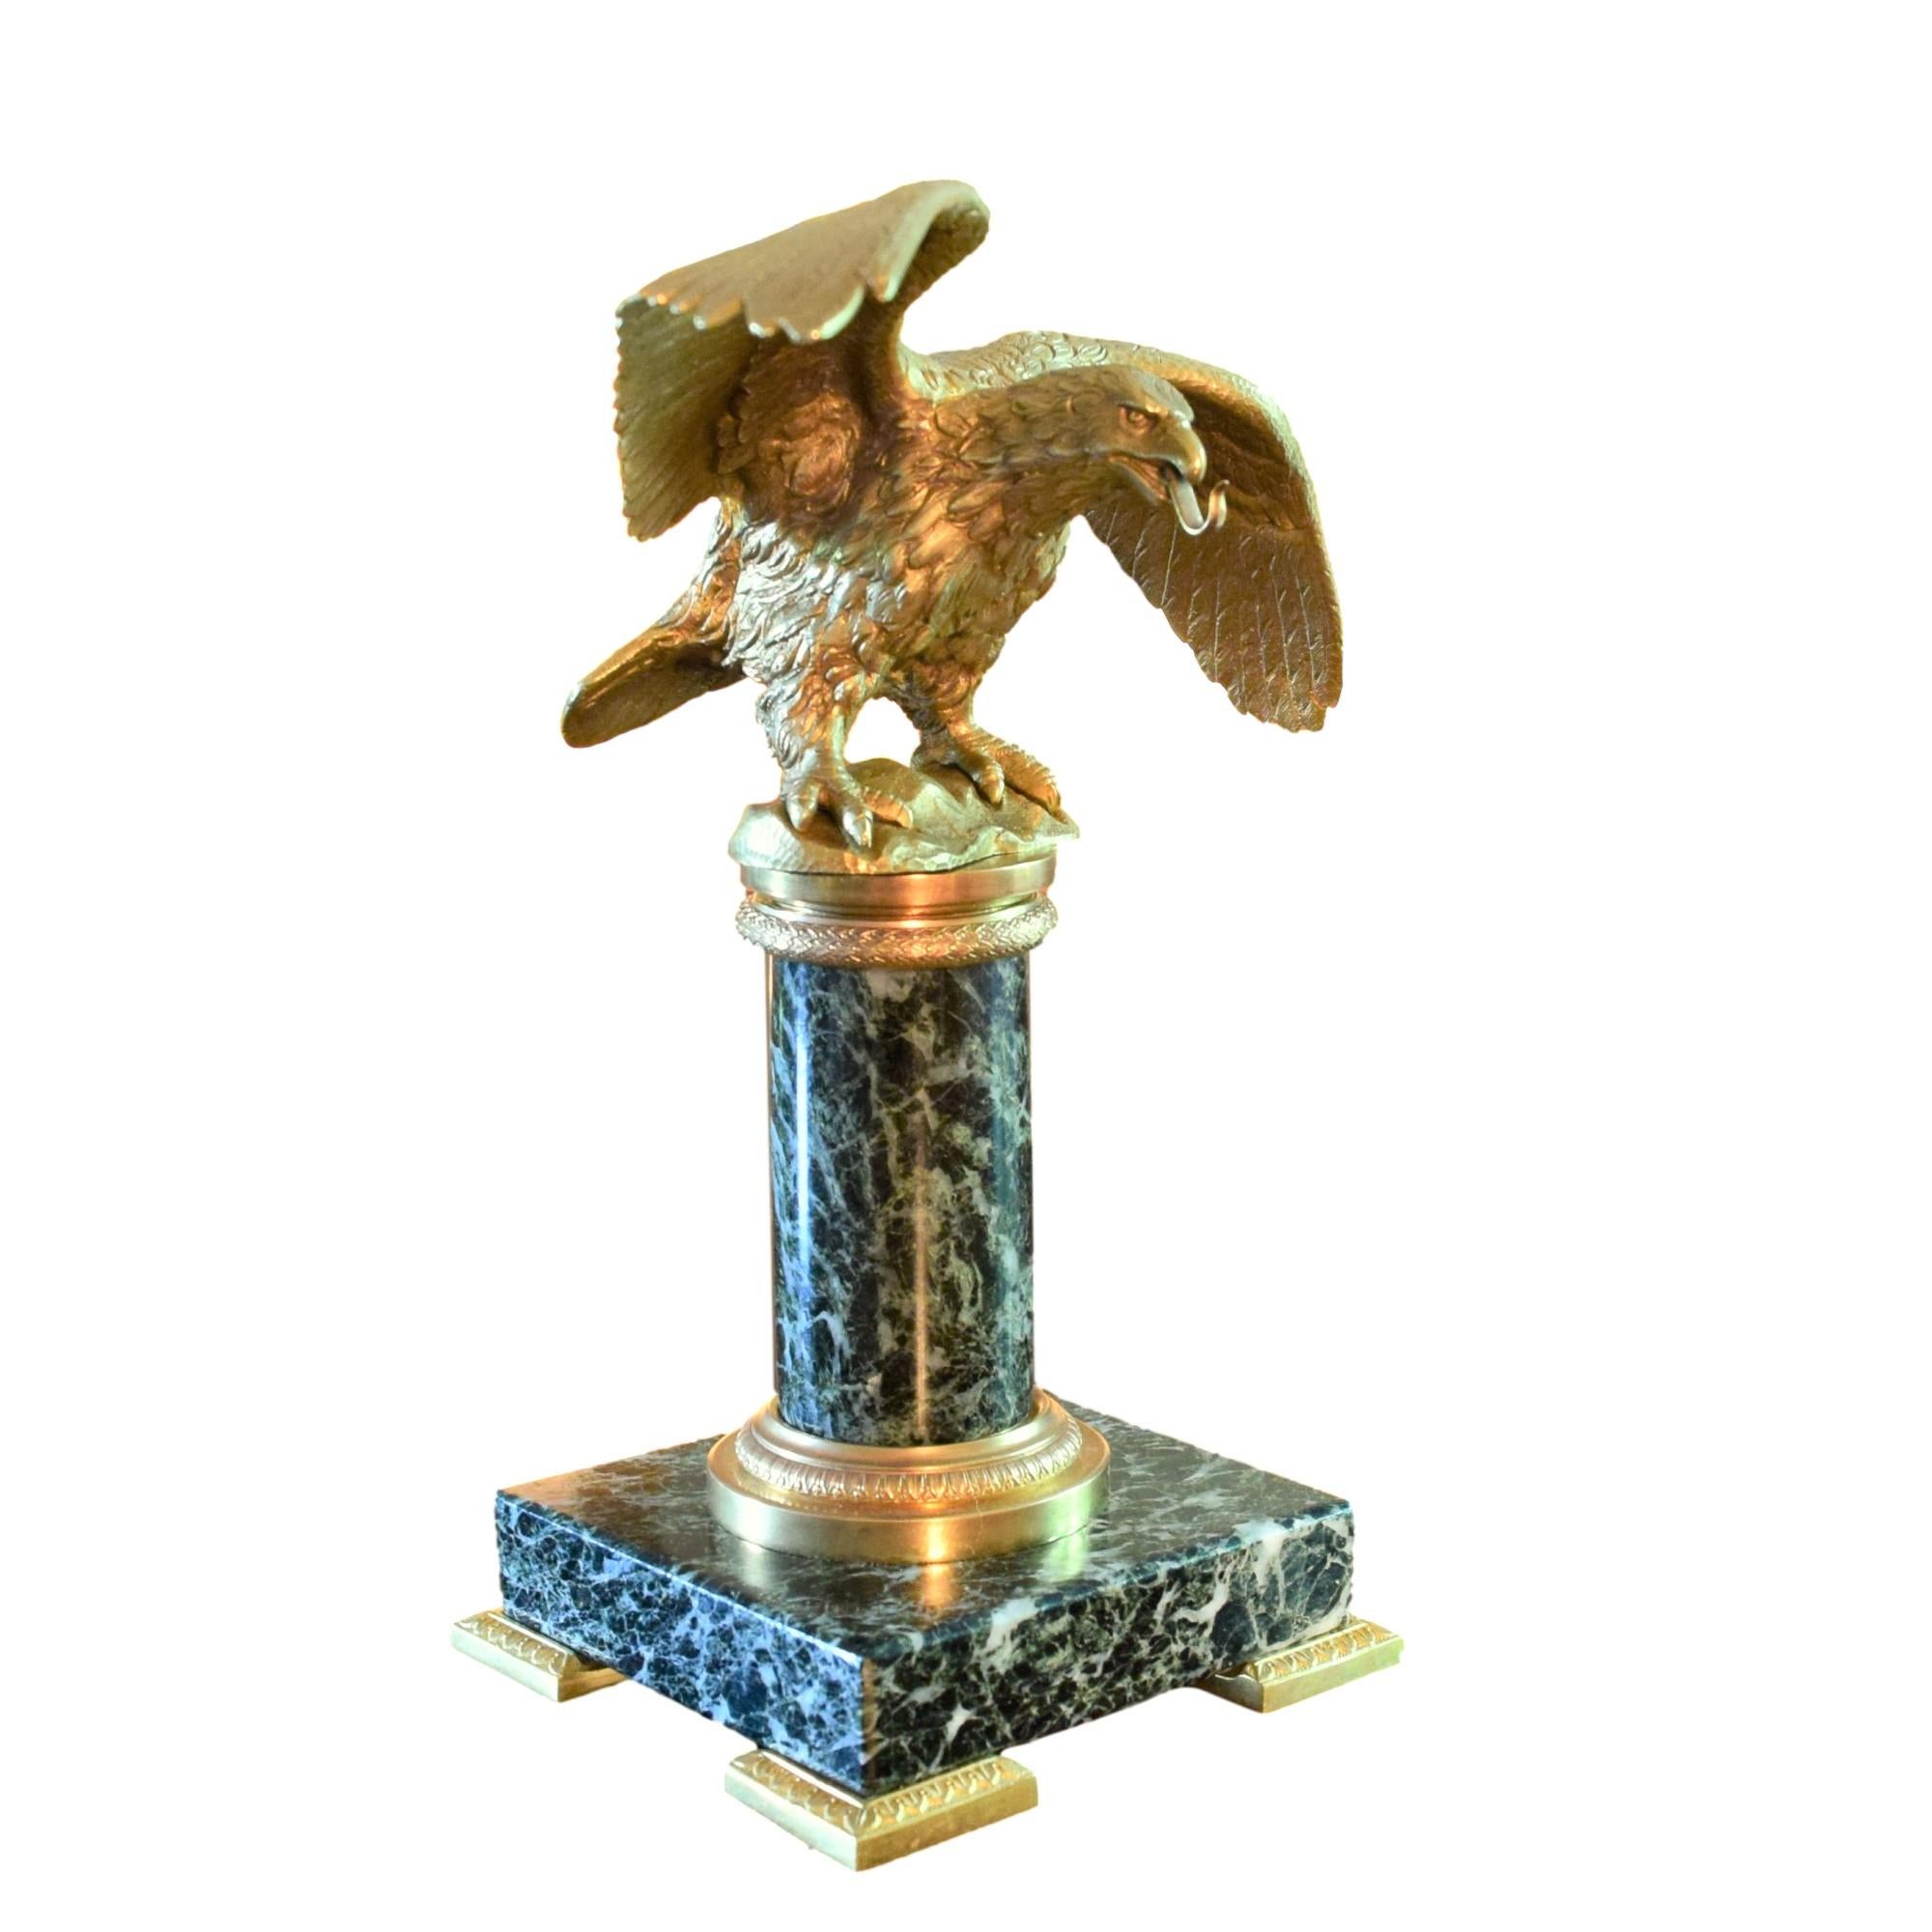 

A Chased and Gilded Eagle Pocket Watch Holder standing on a Green Marble column, itself decorated with gilded bronze details.

This particular eagle is a smaller edition of an eagle used under Napoleon the First’s Flagpoles.
Napoleon chose for his